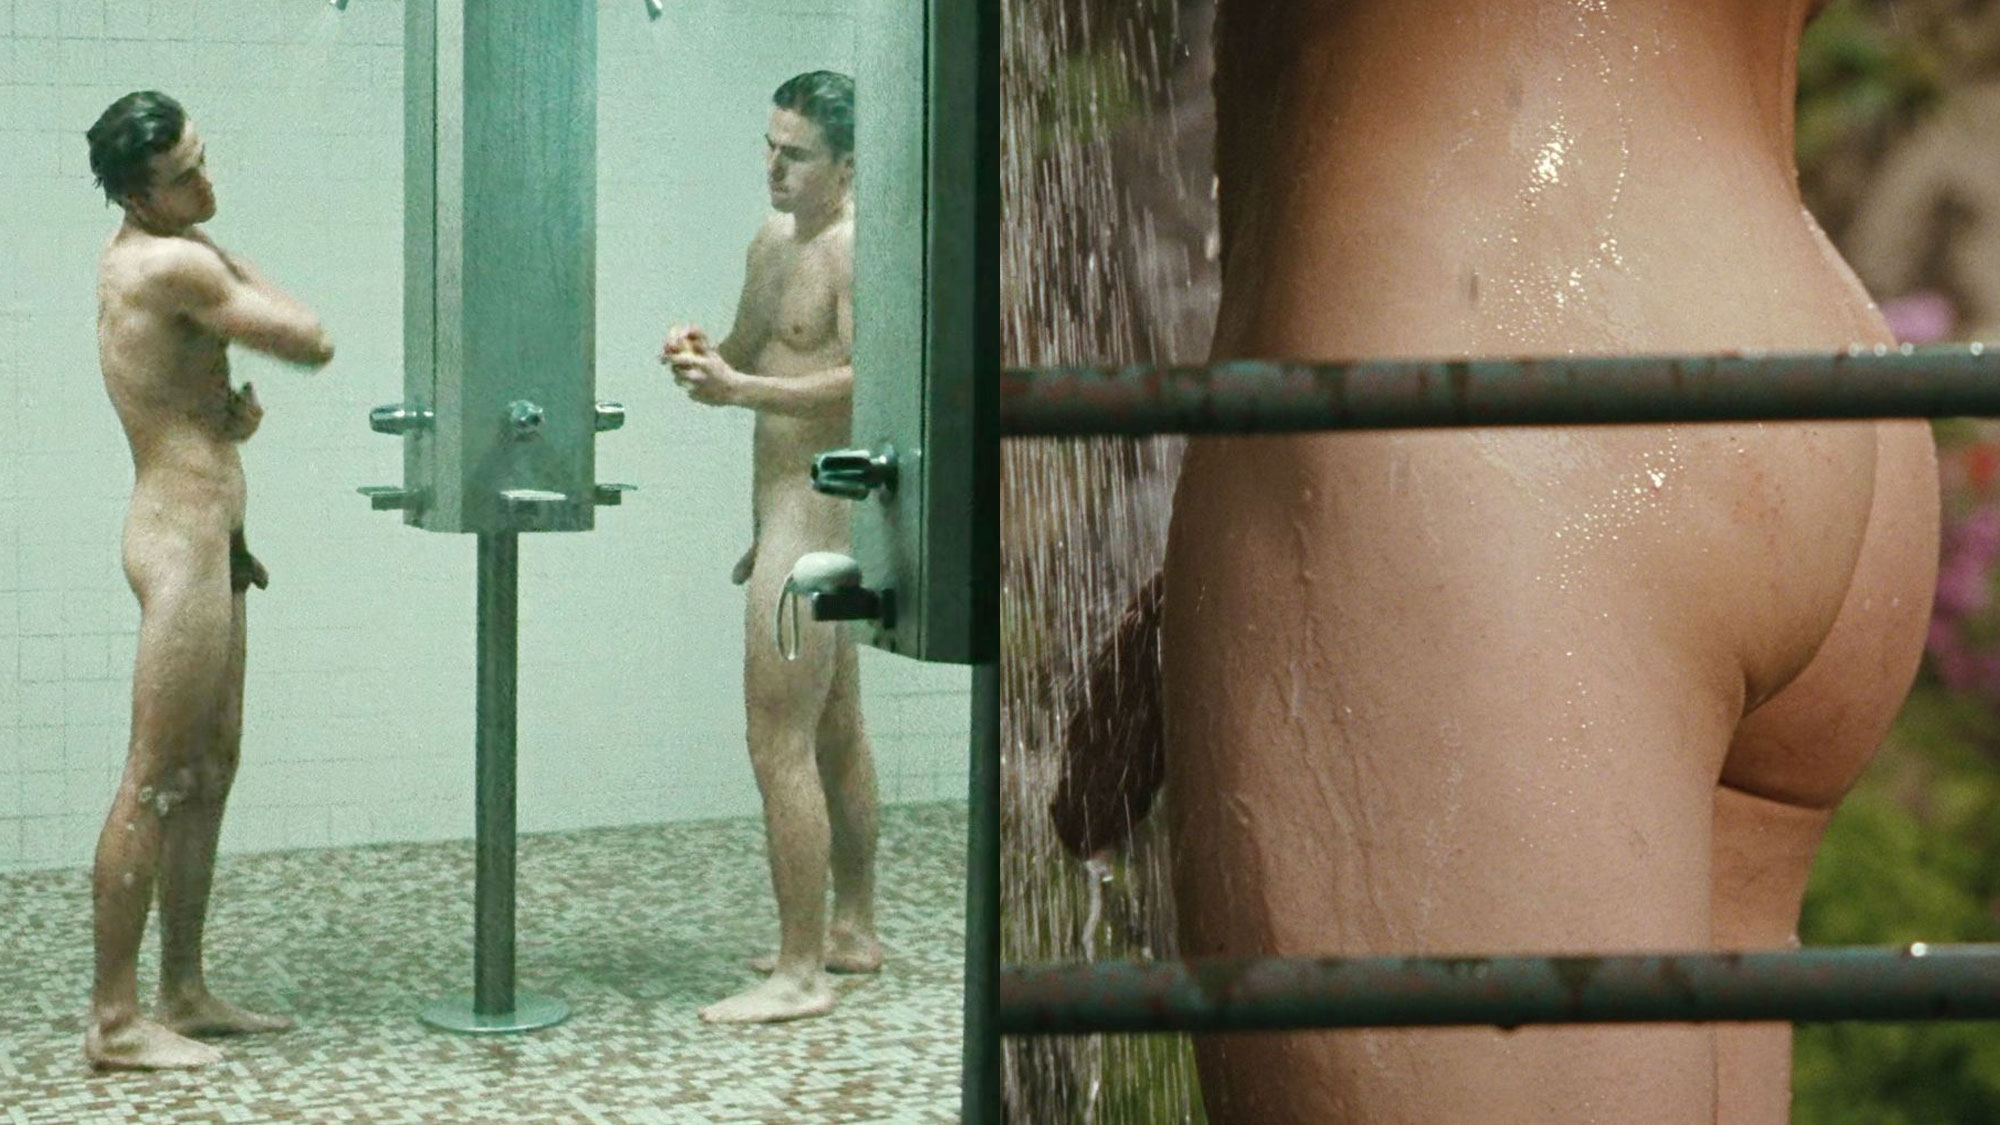 April Showers Listing Off Hollywoods Best Full Frontal Shower Scenes image